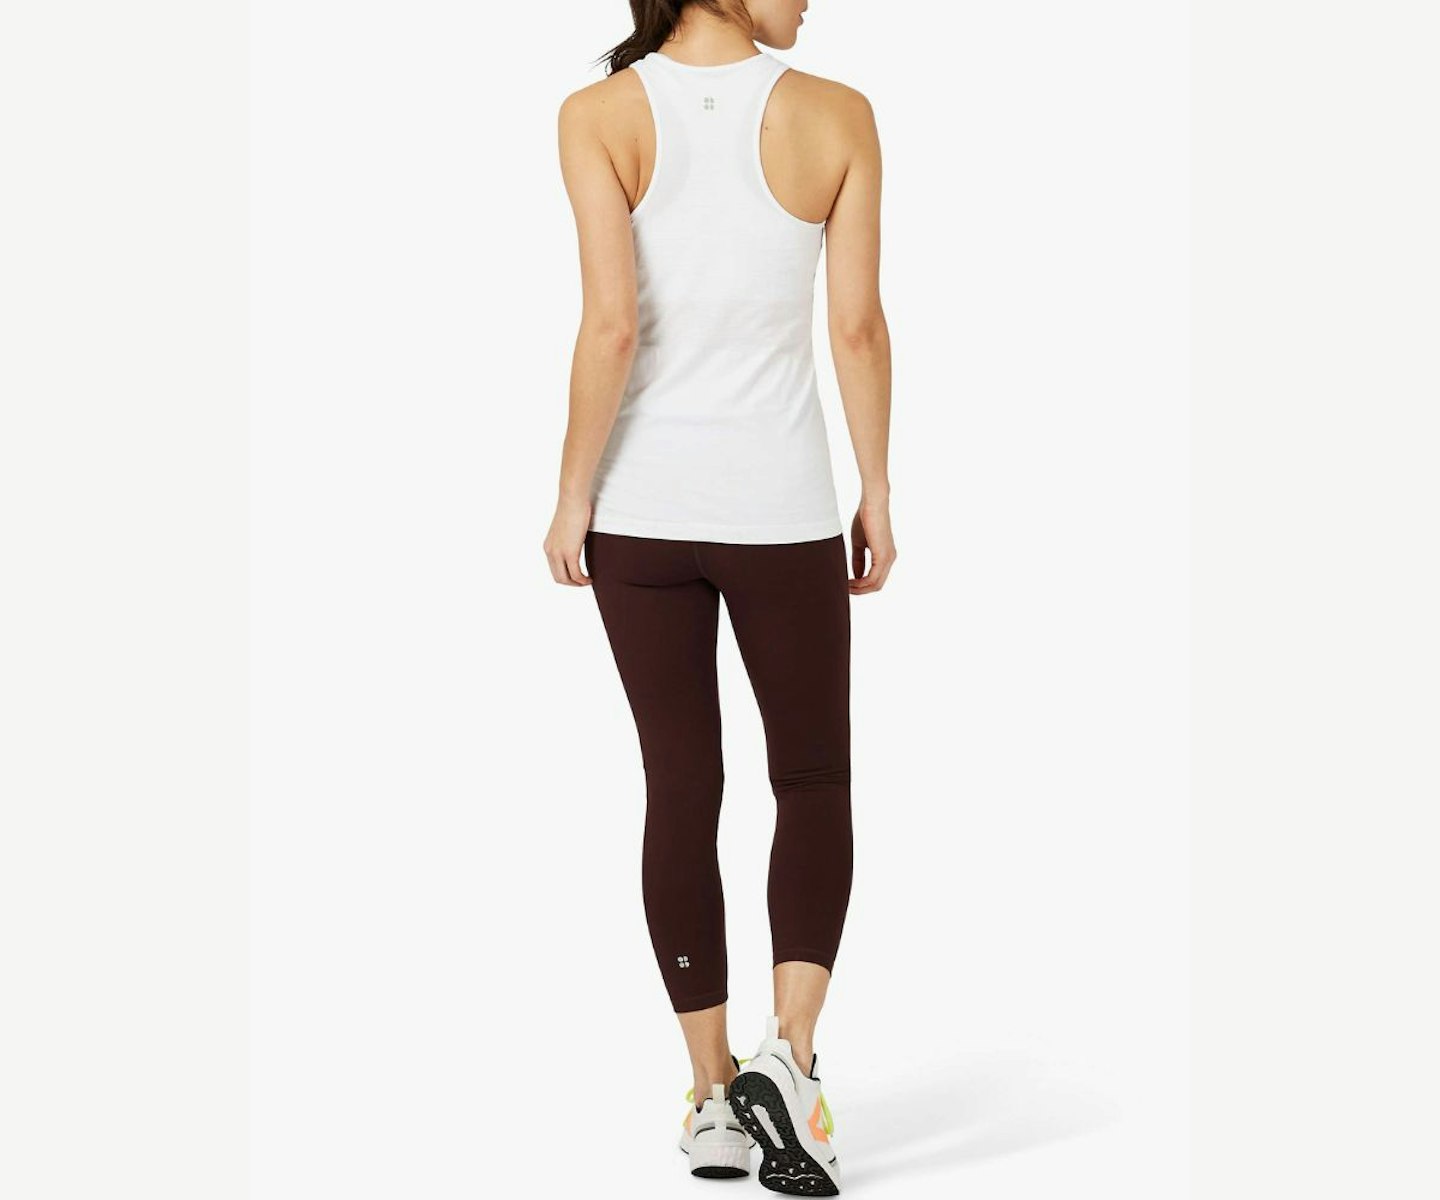 gym-clothing-for-women-over-50